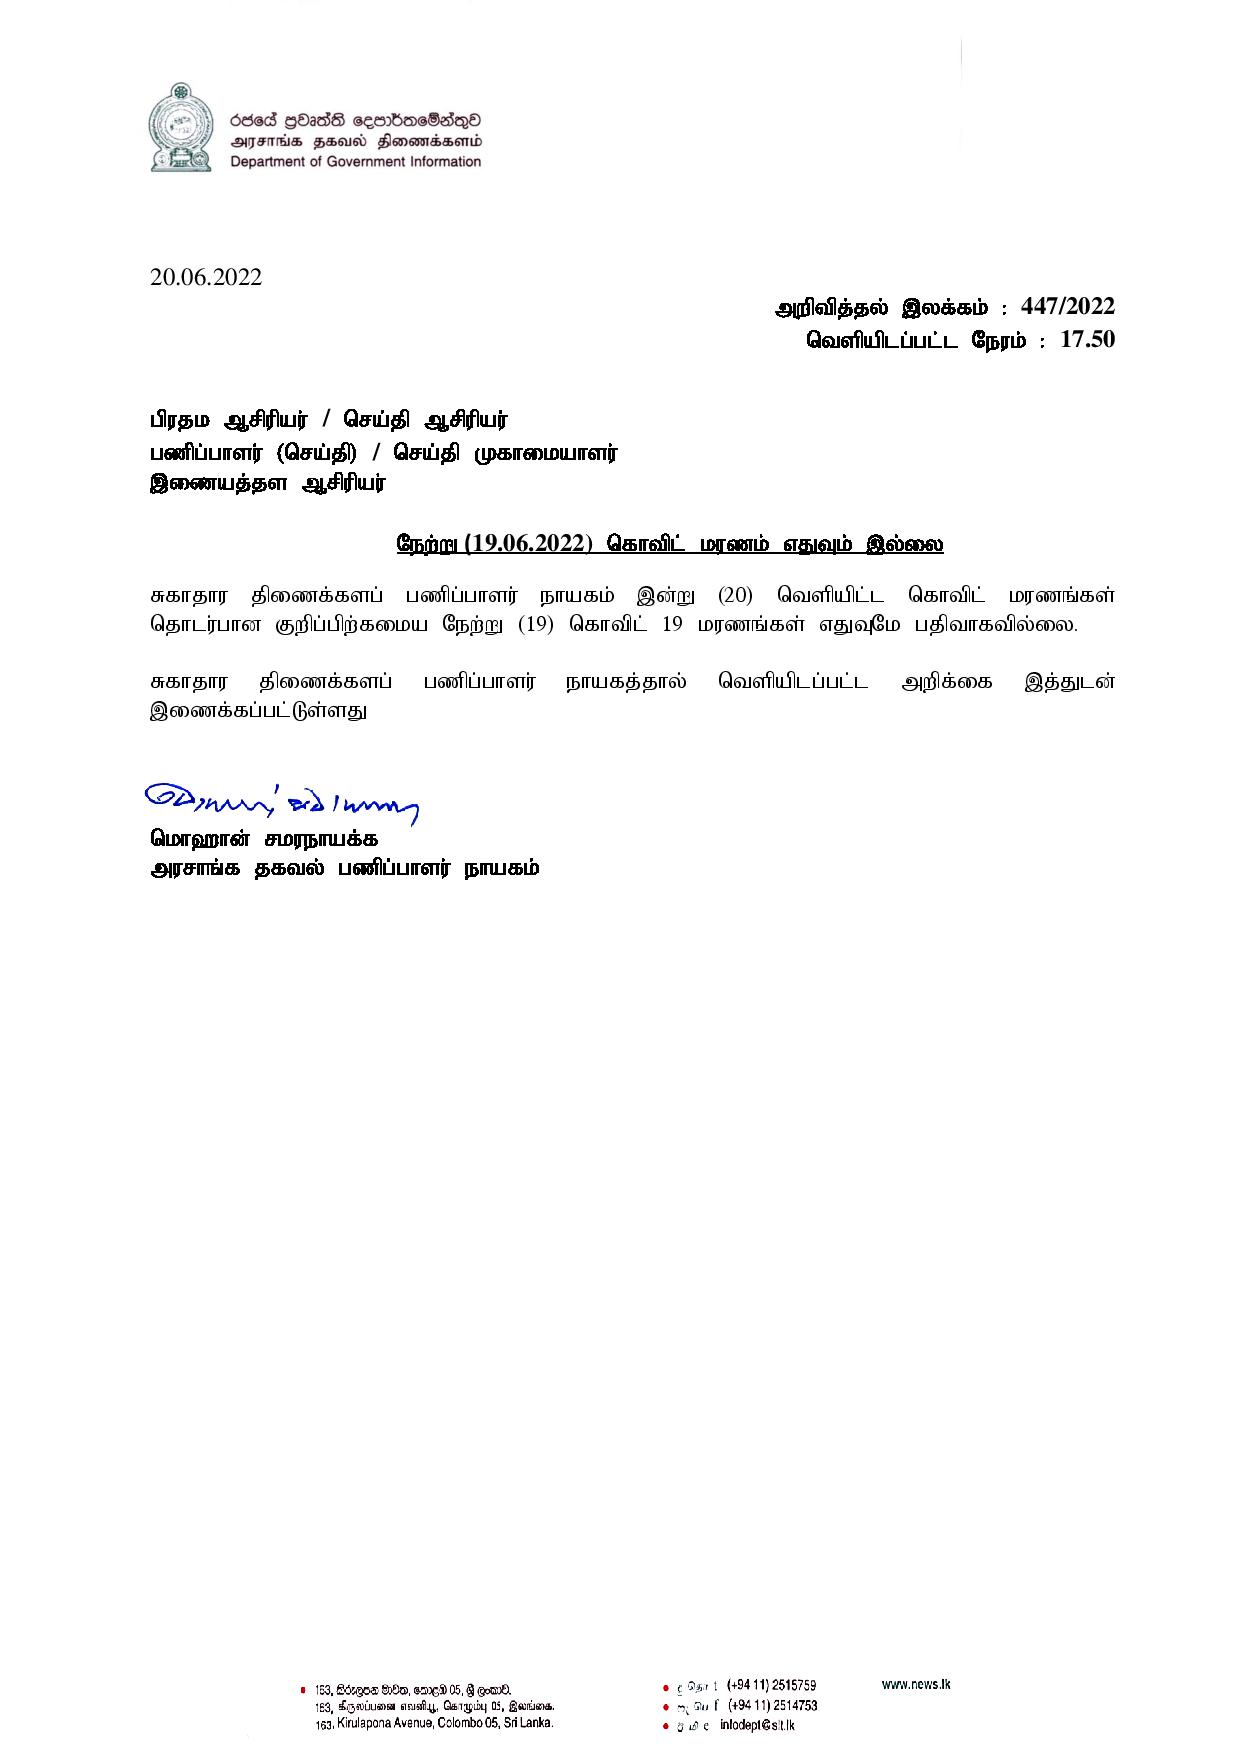 Press Release 447 Tamil page 001